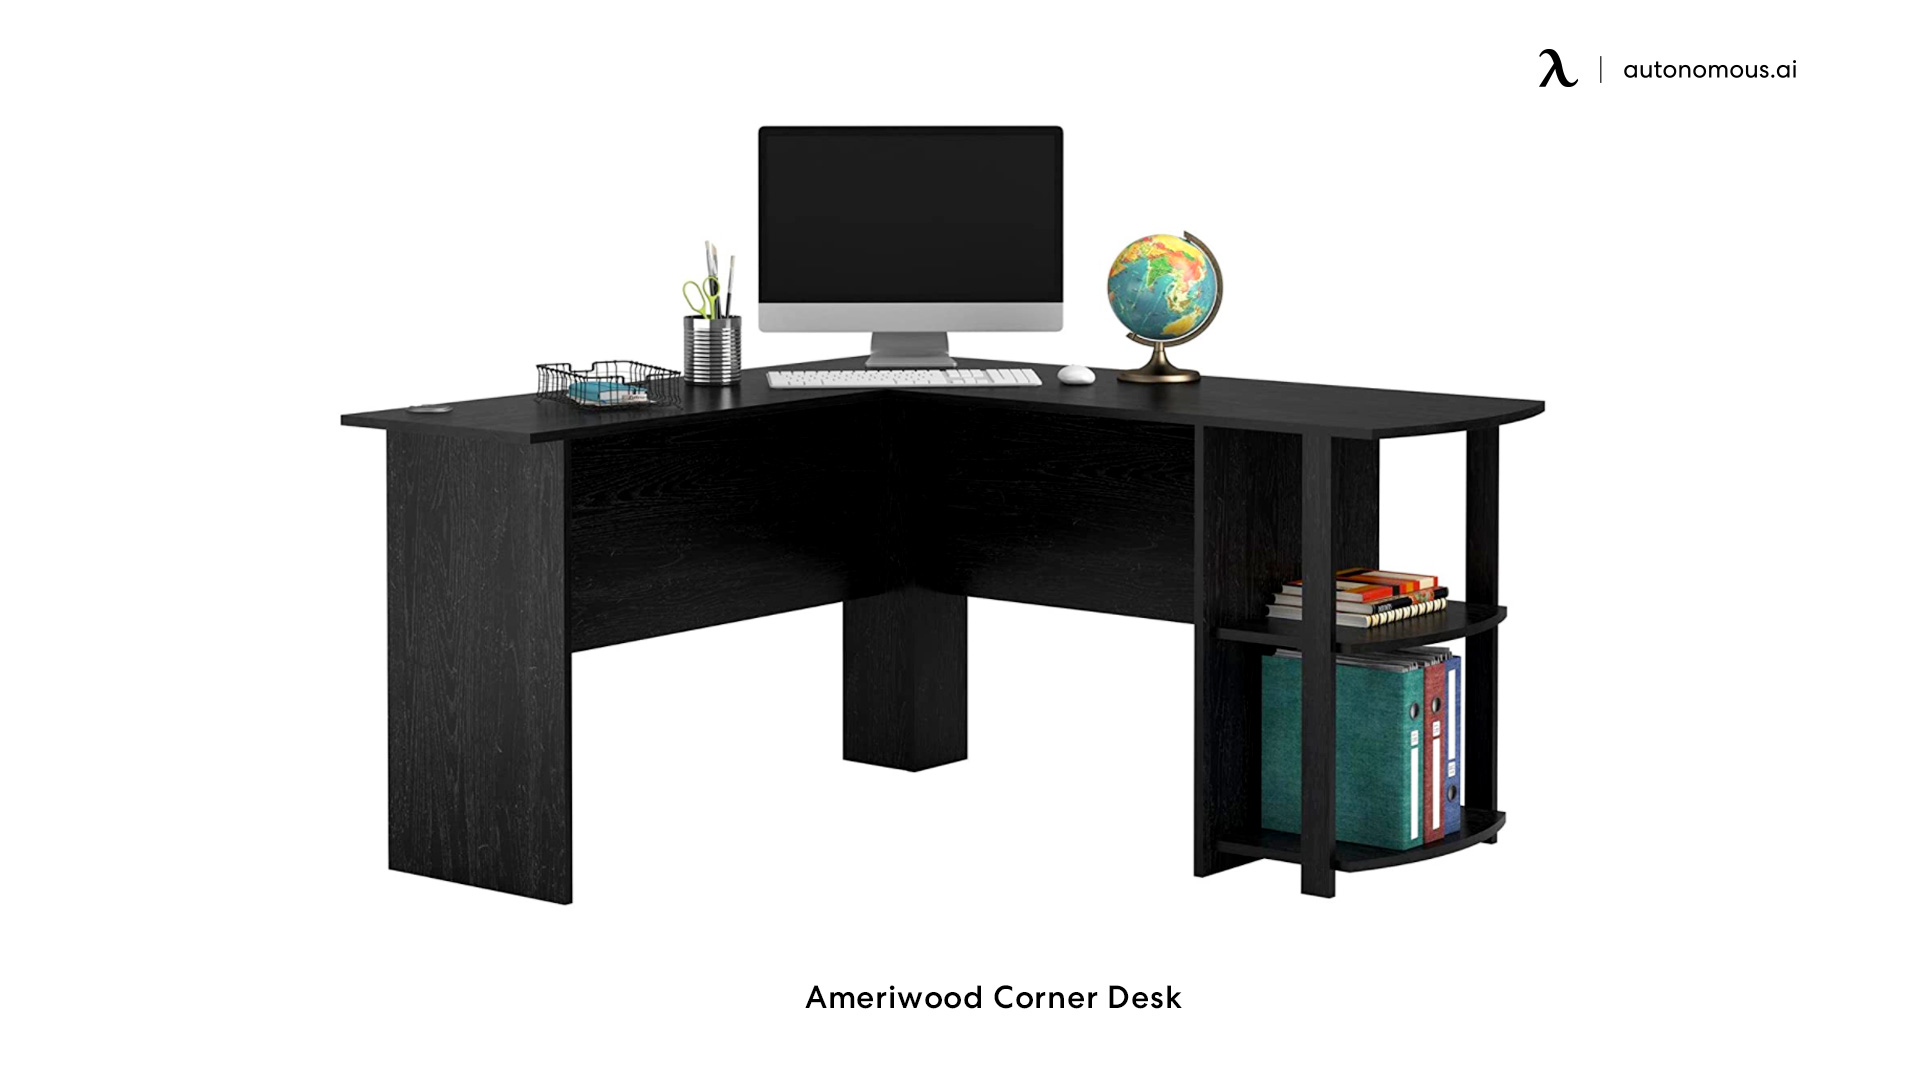 Ameriwood L-shaped desk for a home office